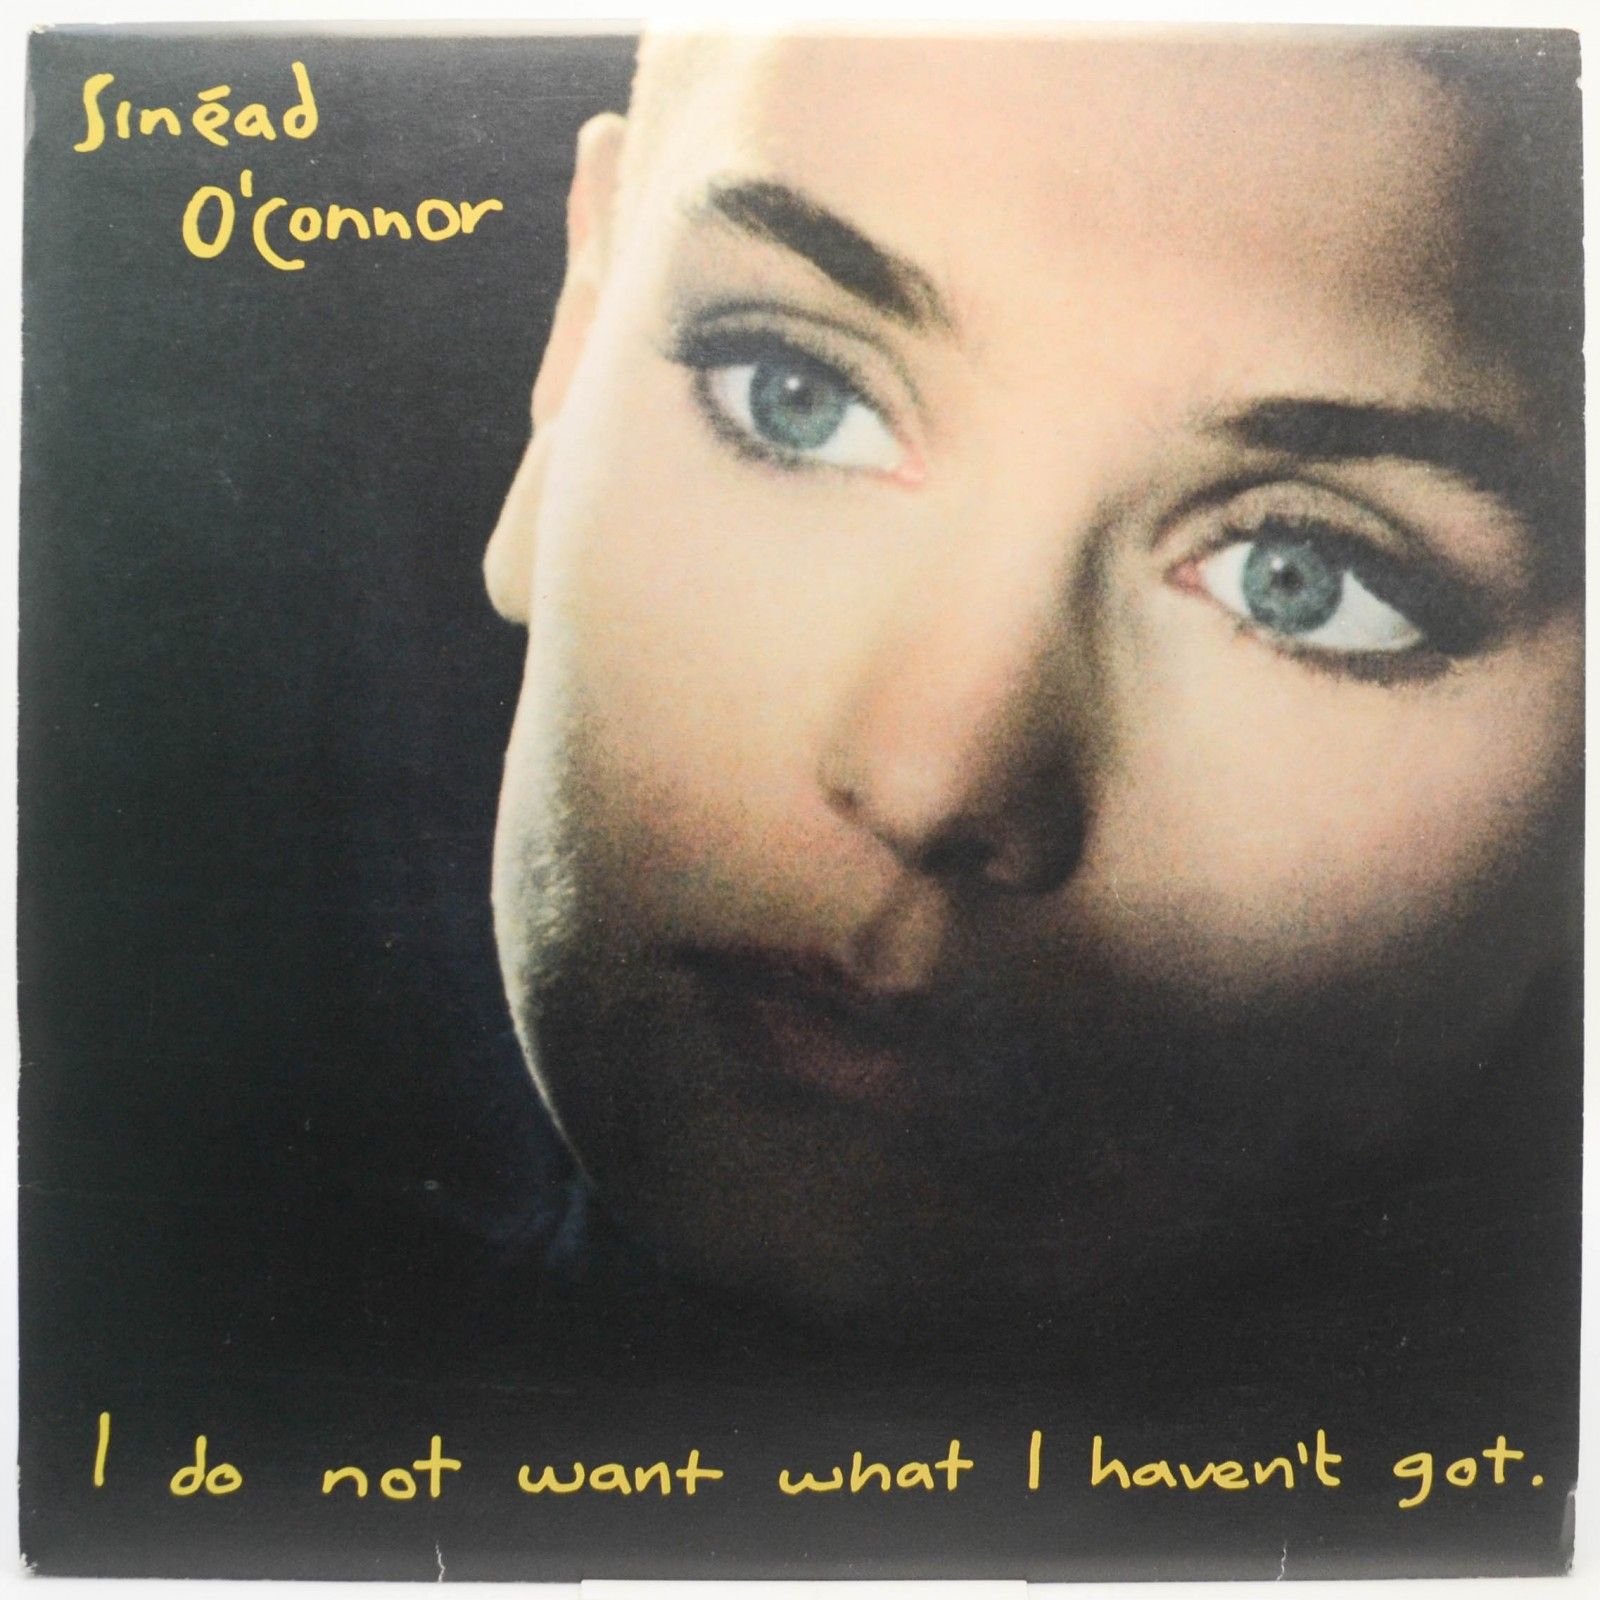 Sinéad O'Connor — I Do Not Want What I Haven't Got, 1990